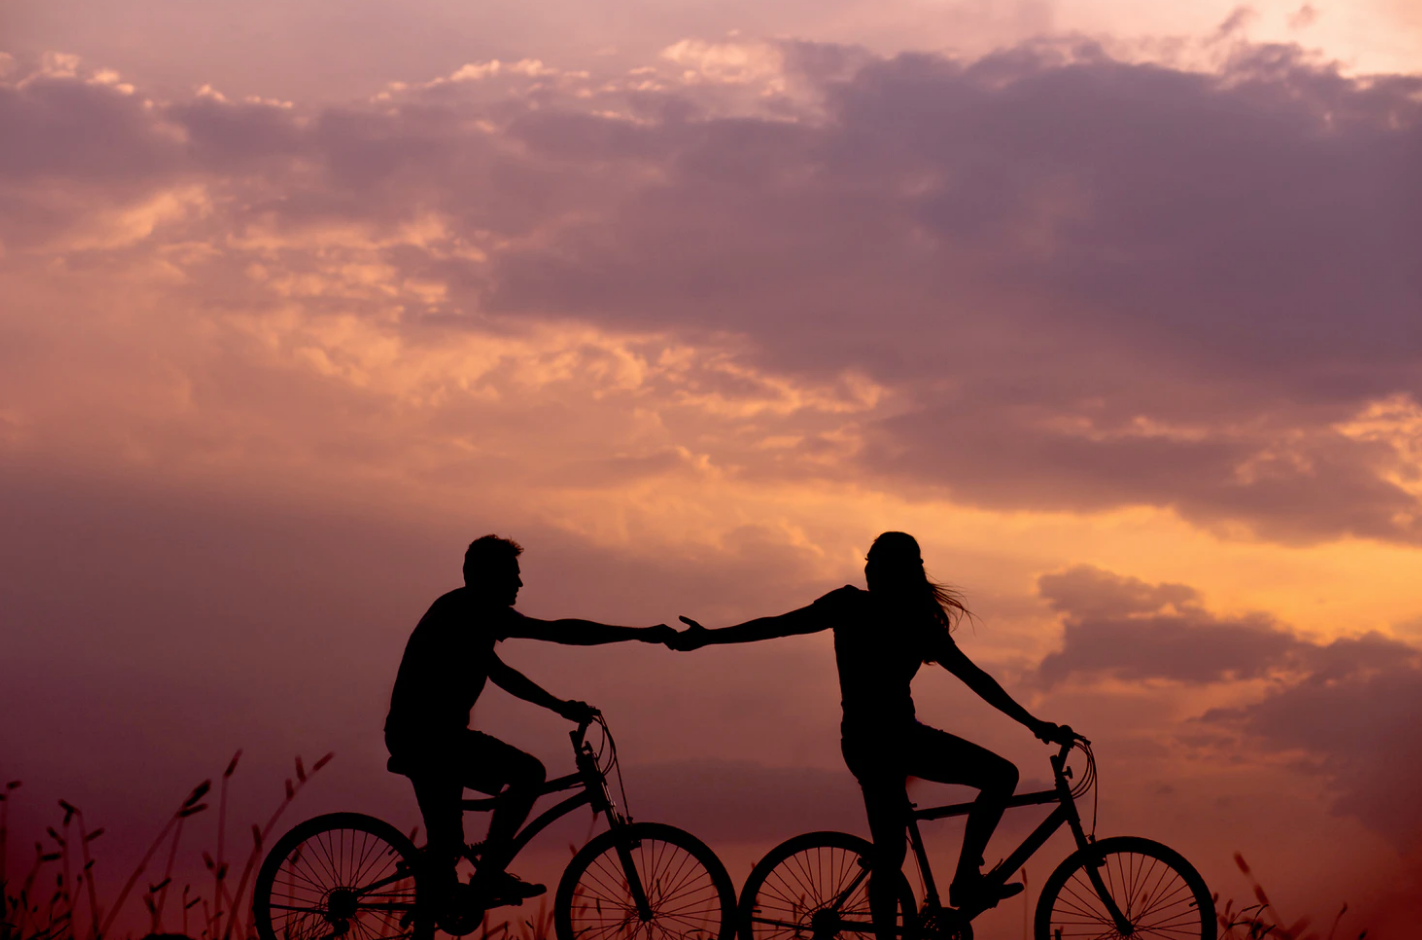 date spots for mount allison university students bike riders holding hands during sunset